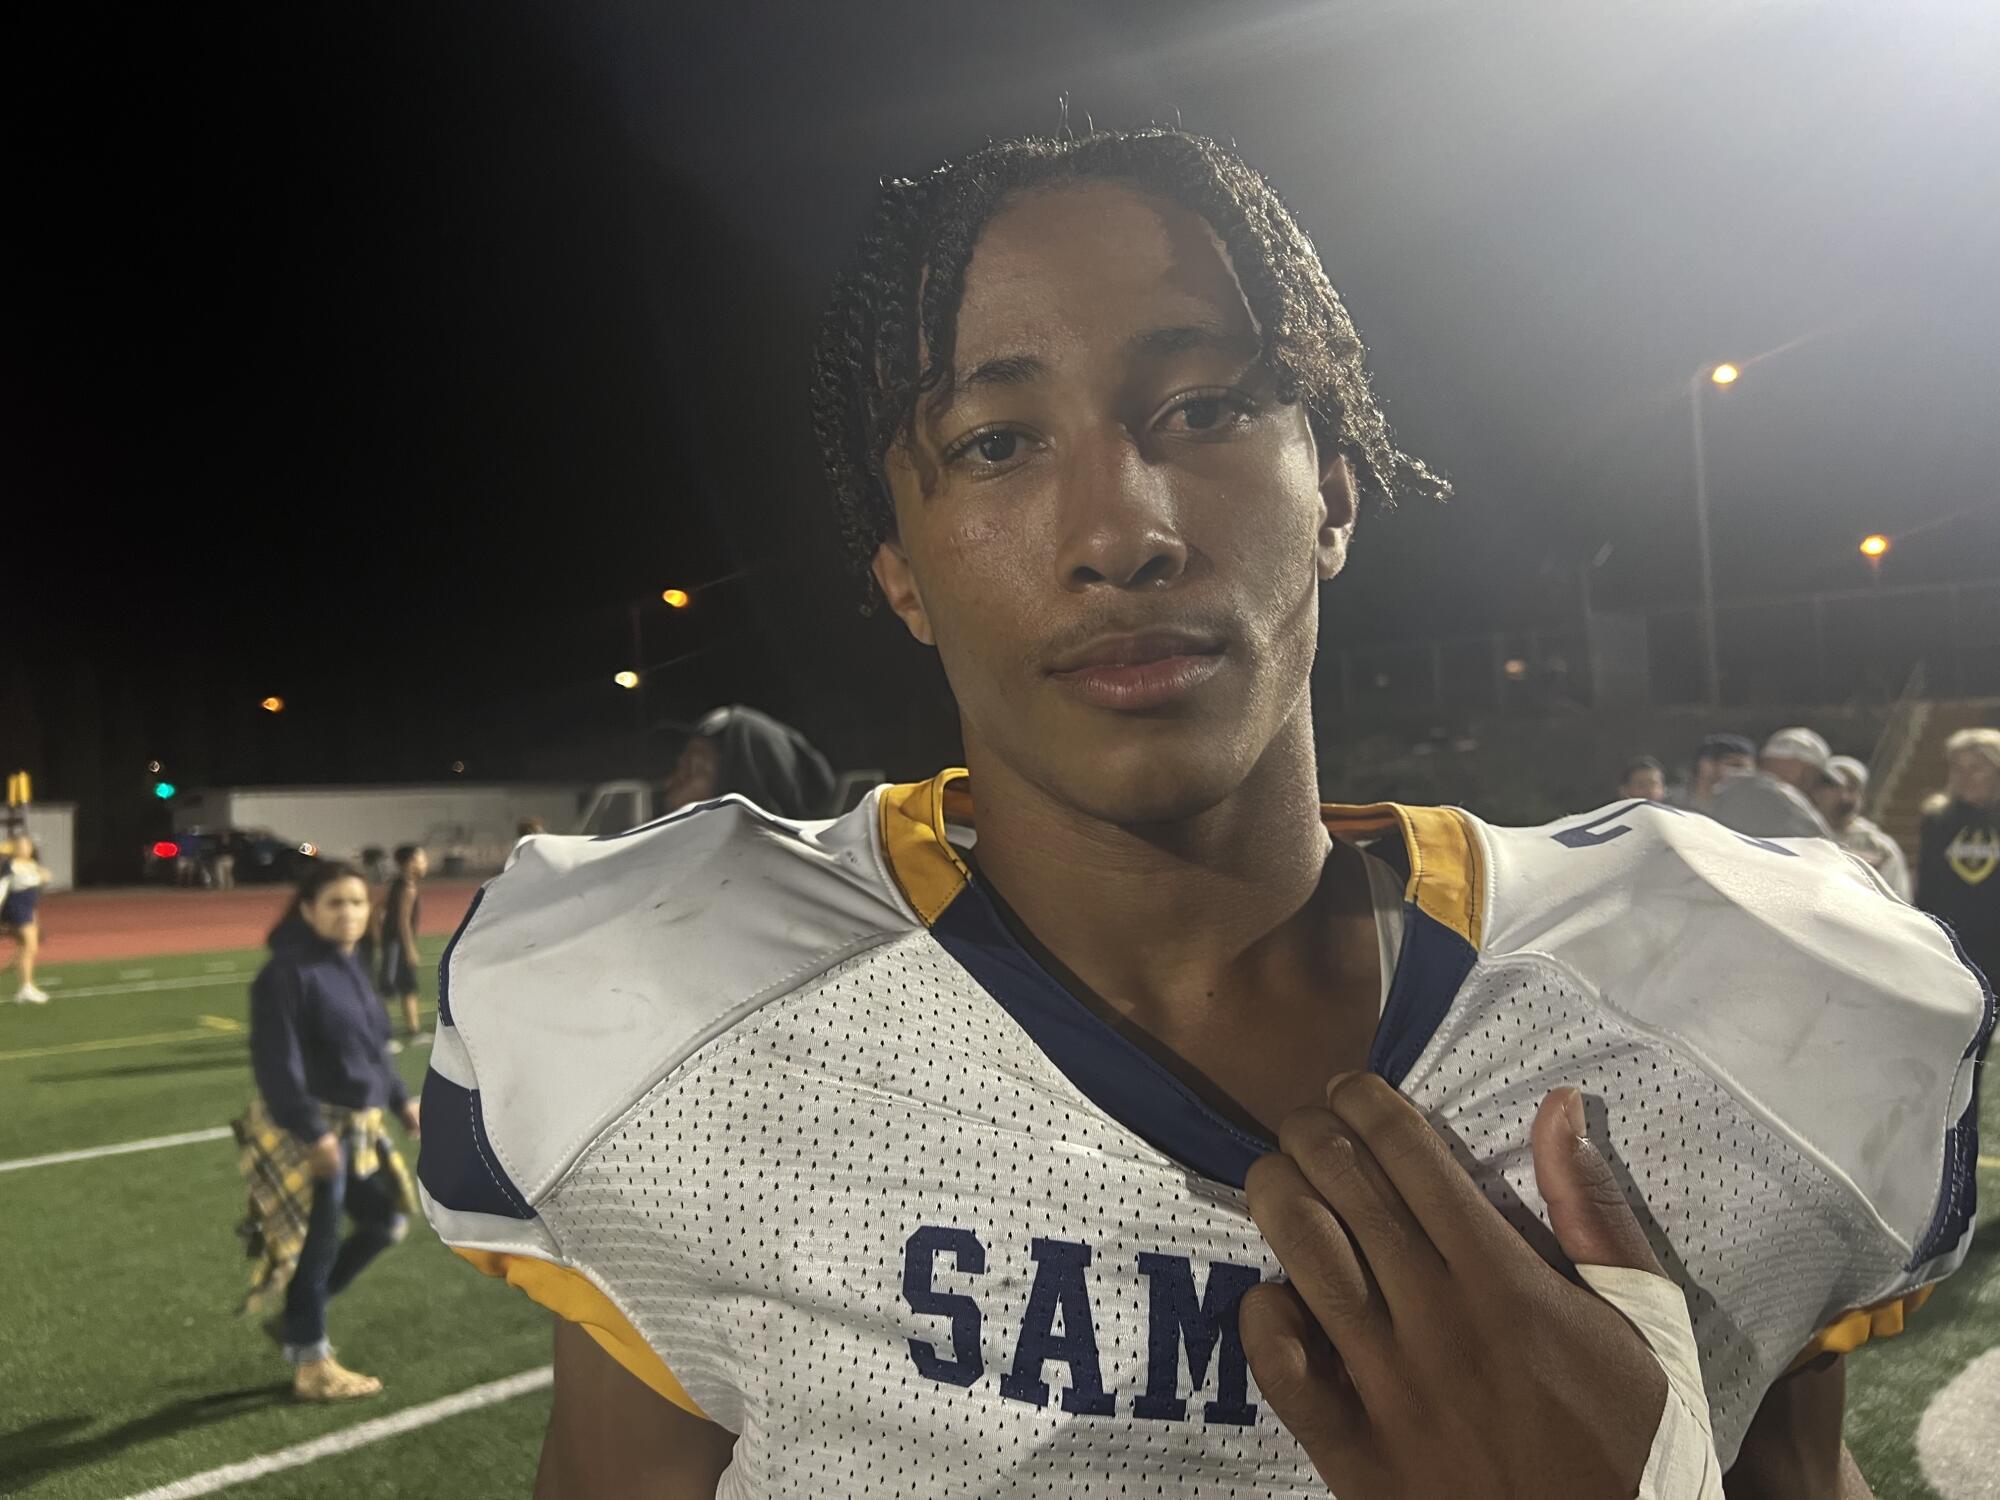 Junior safety Charles Cravings of Santa Monica poses for a photo after a game.